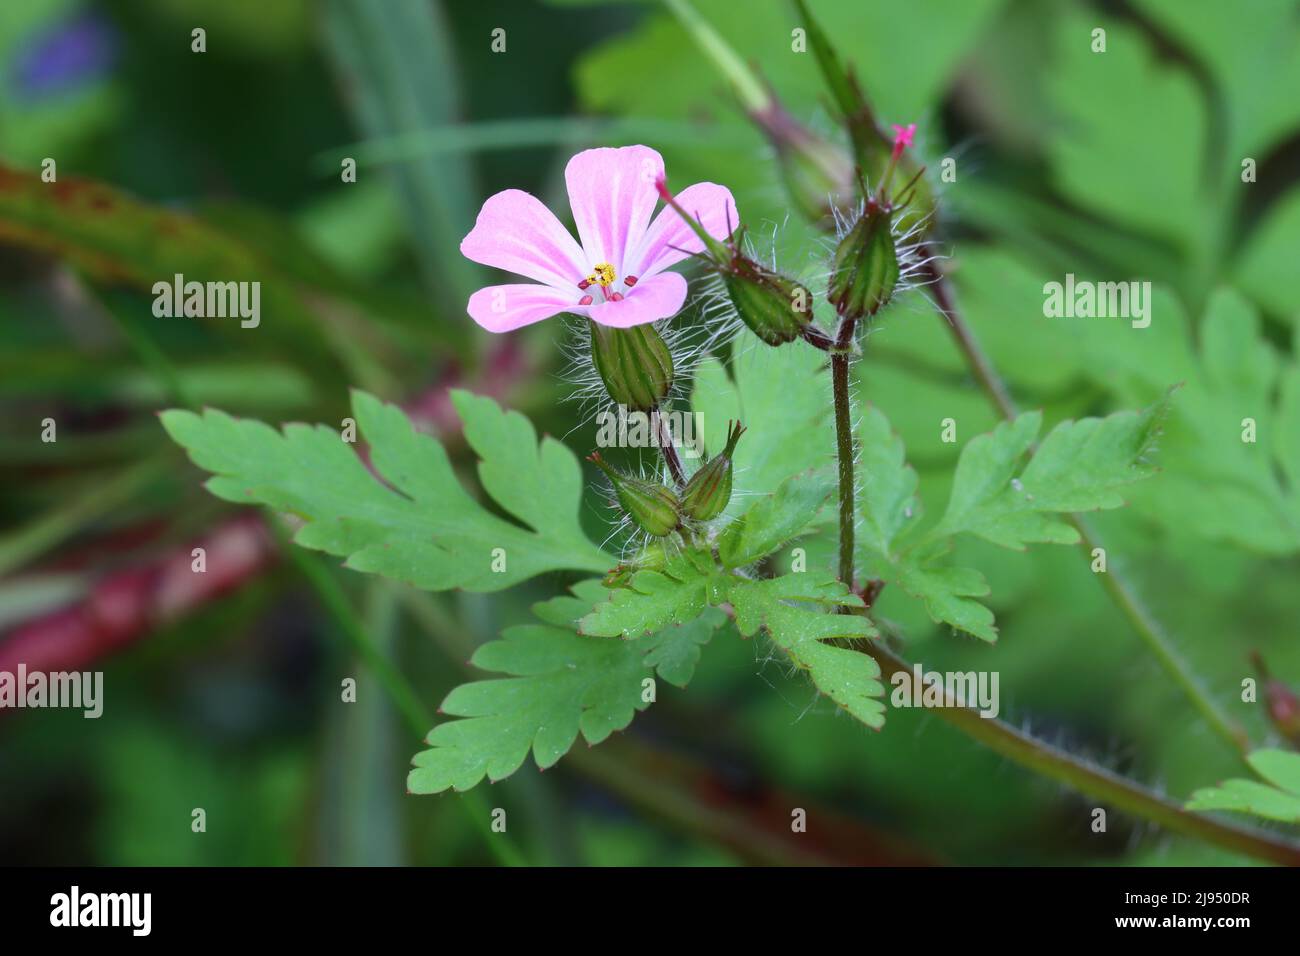 close-up of a beautiful geranium robertianum flower and its delicately feathered leaves against a green blurry background Stock Photo